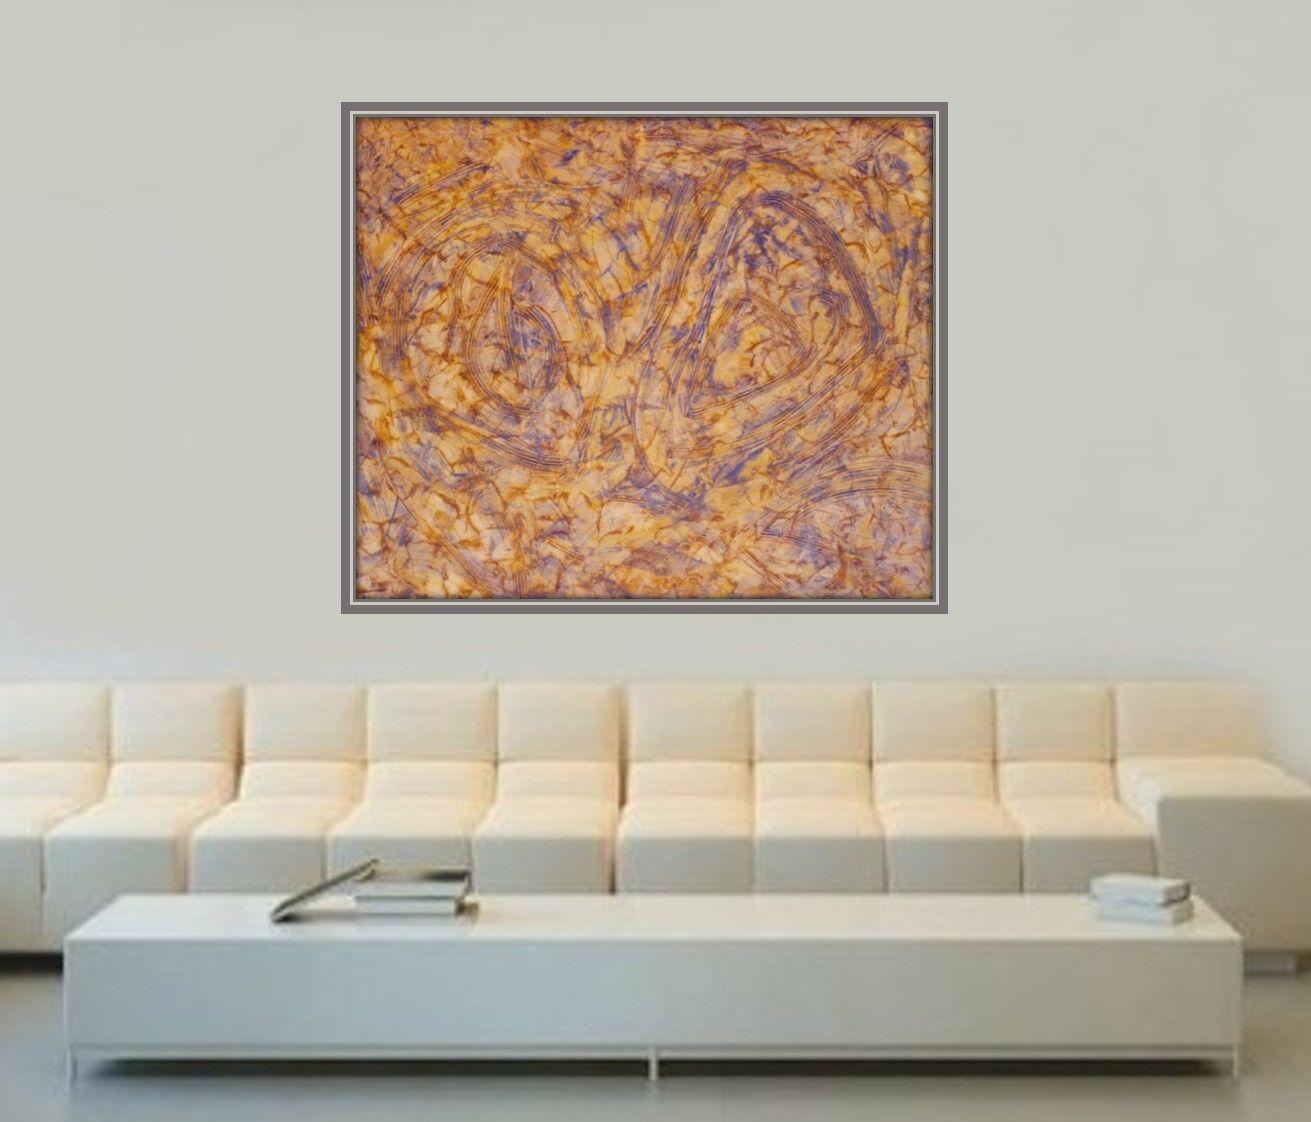 A mysterious honey colored realm of swirling lines and hidden forms. :: Painting :: Abstract :: This piece comes with an official certificate of authenticity signed by the artist :: Ready to Hang: Yes :: Signed: Yes :: Signature Location: On the